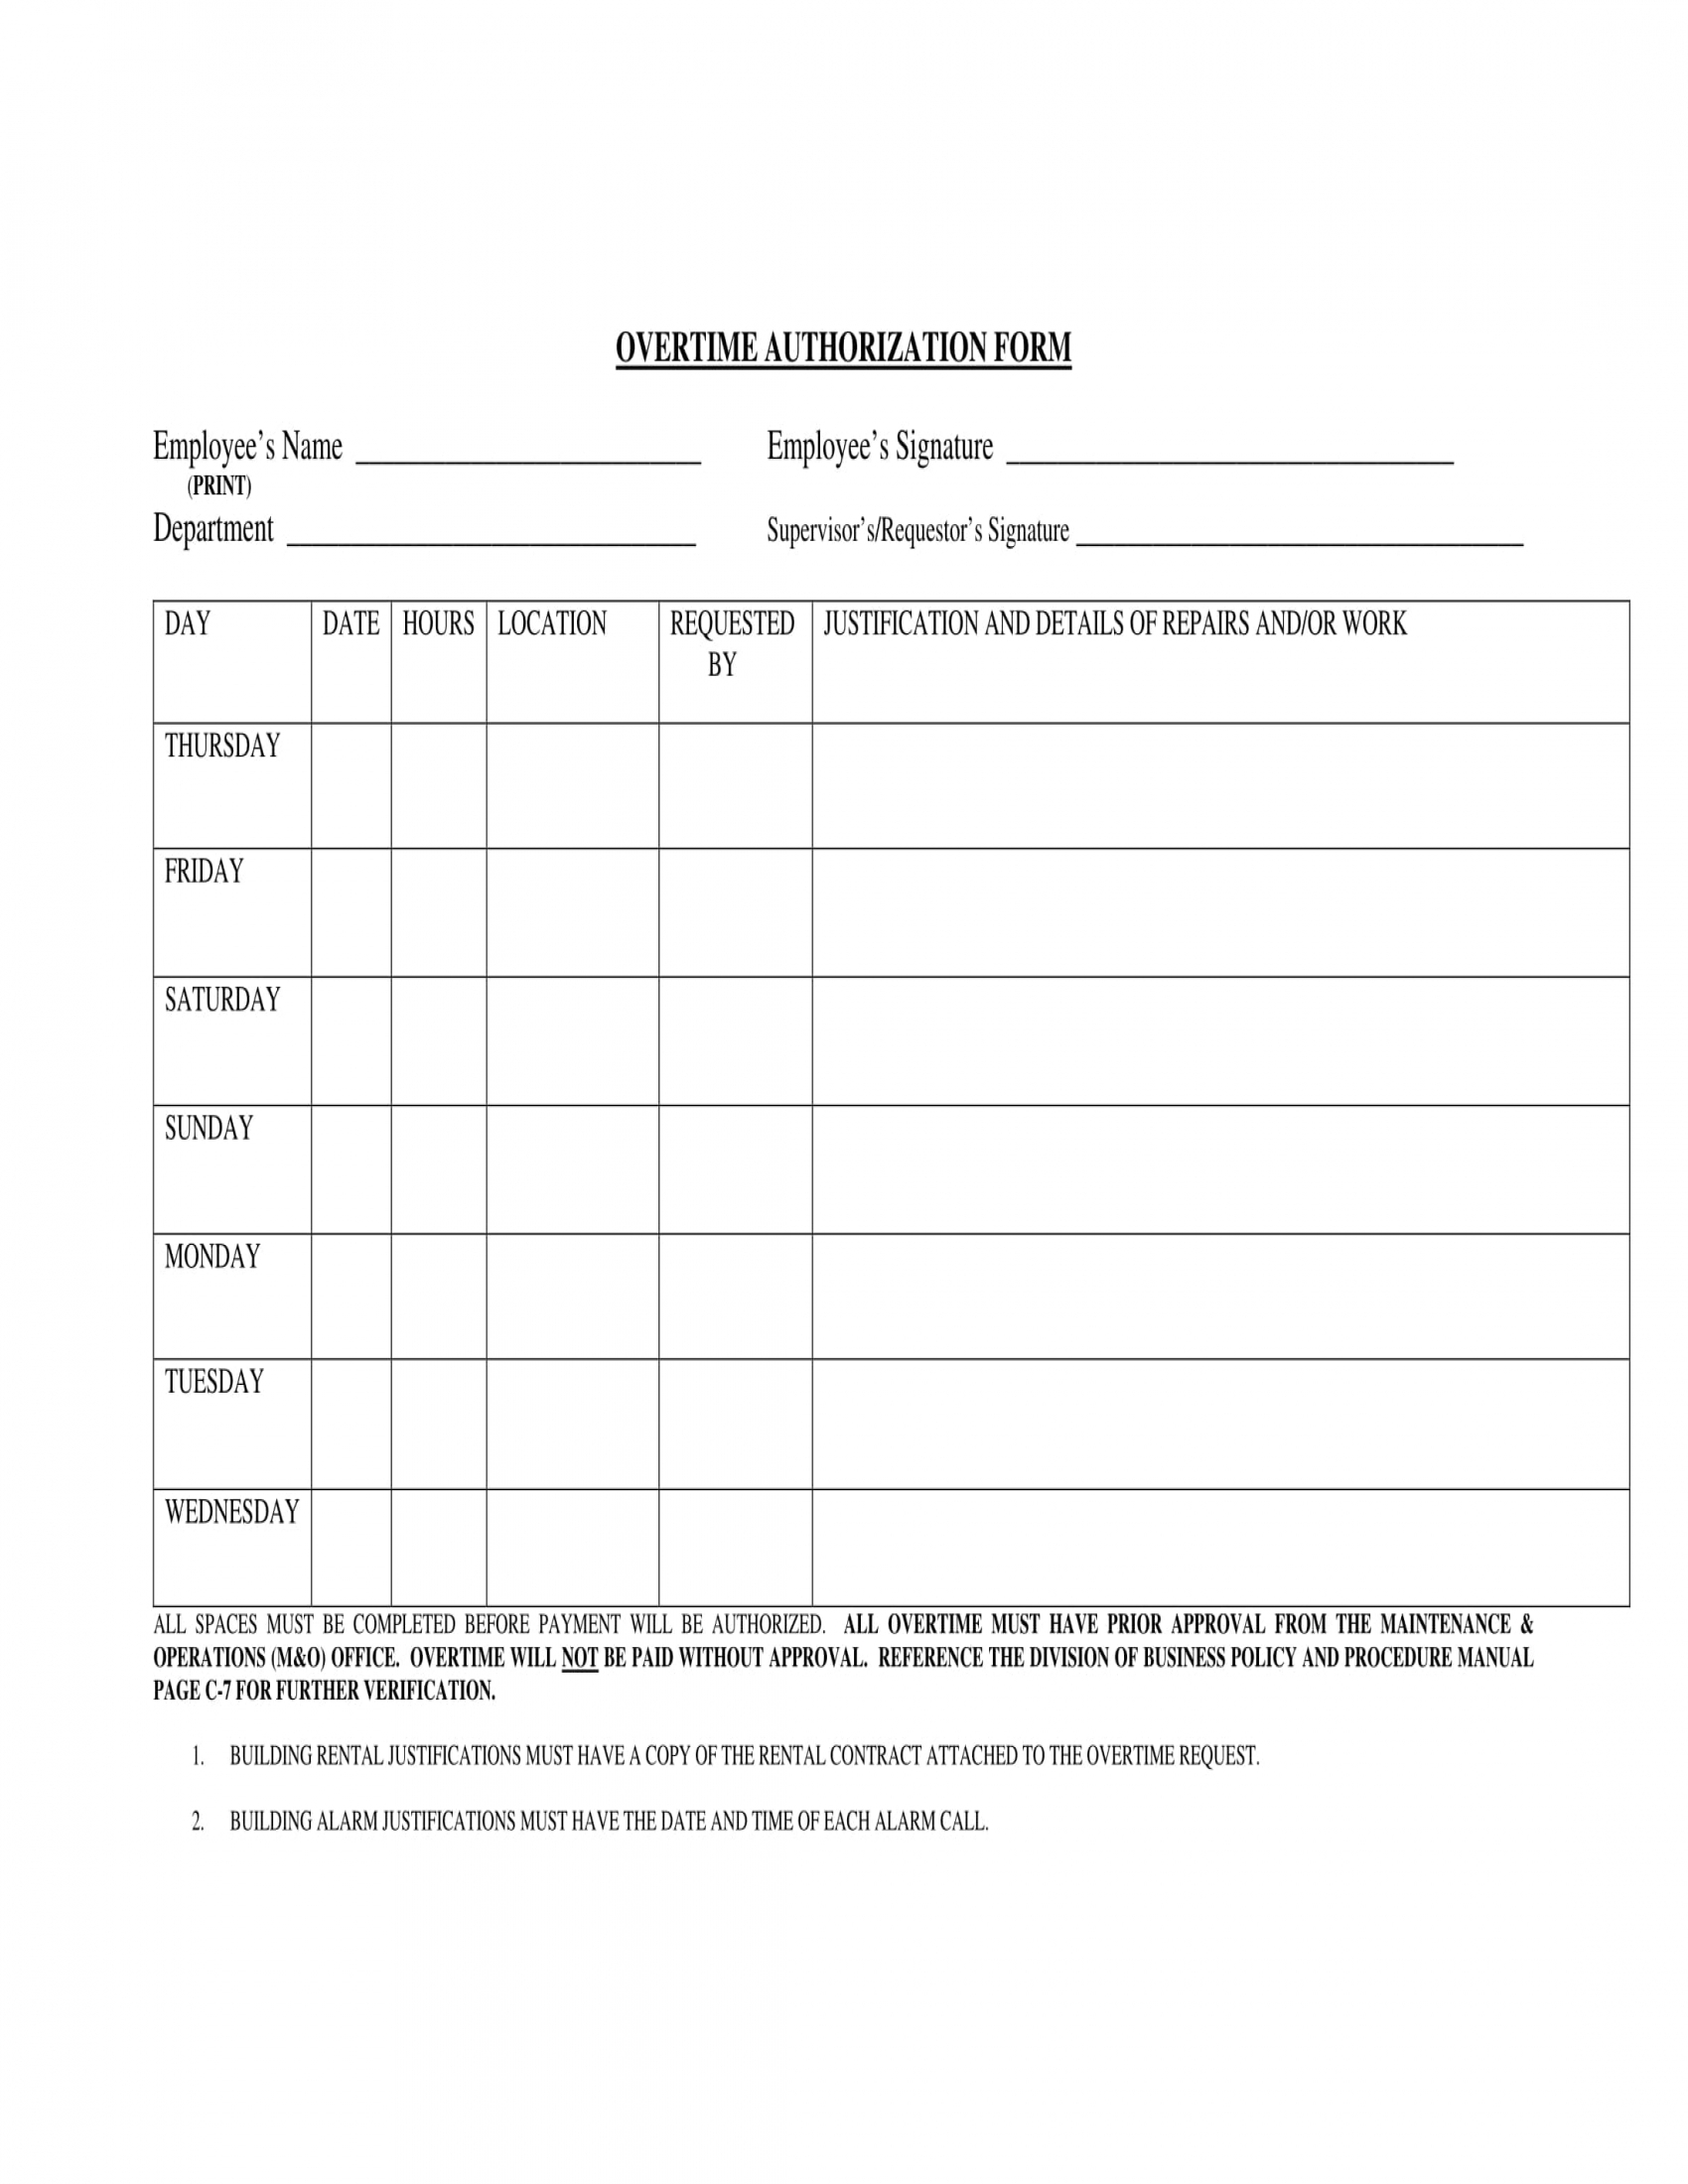 daily overtime authorization form 1